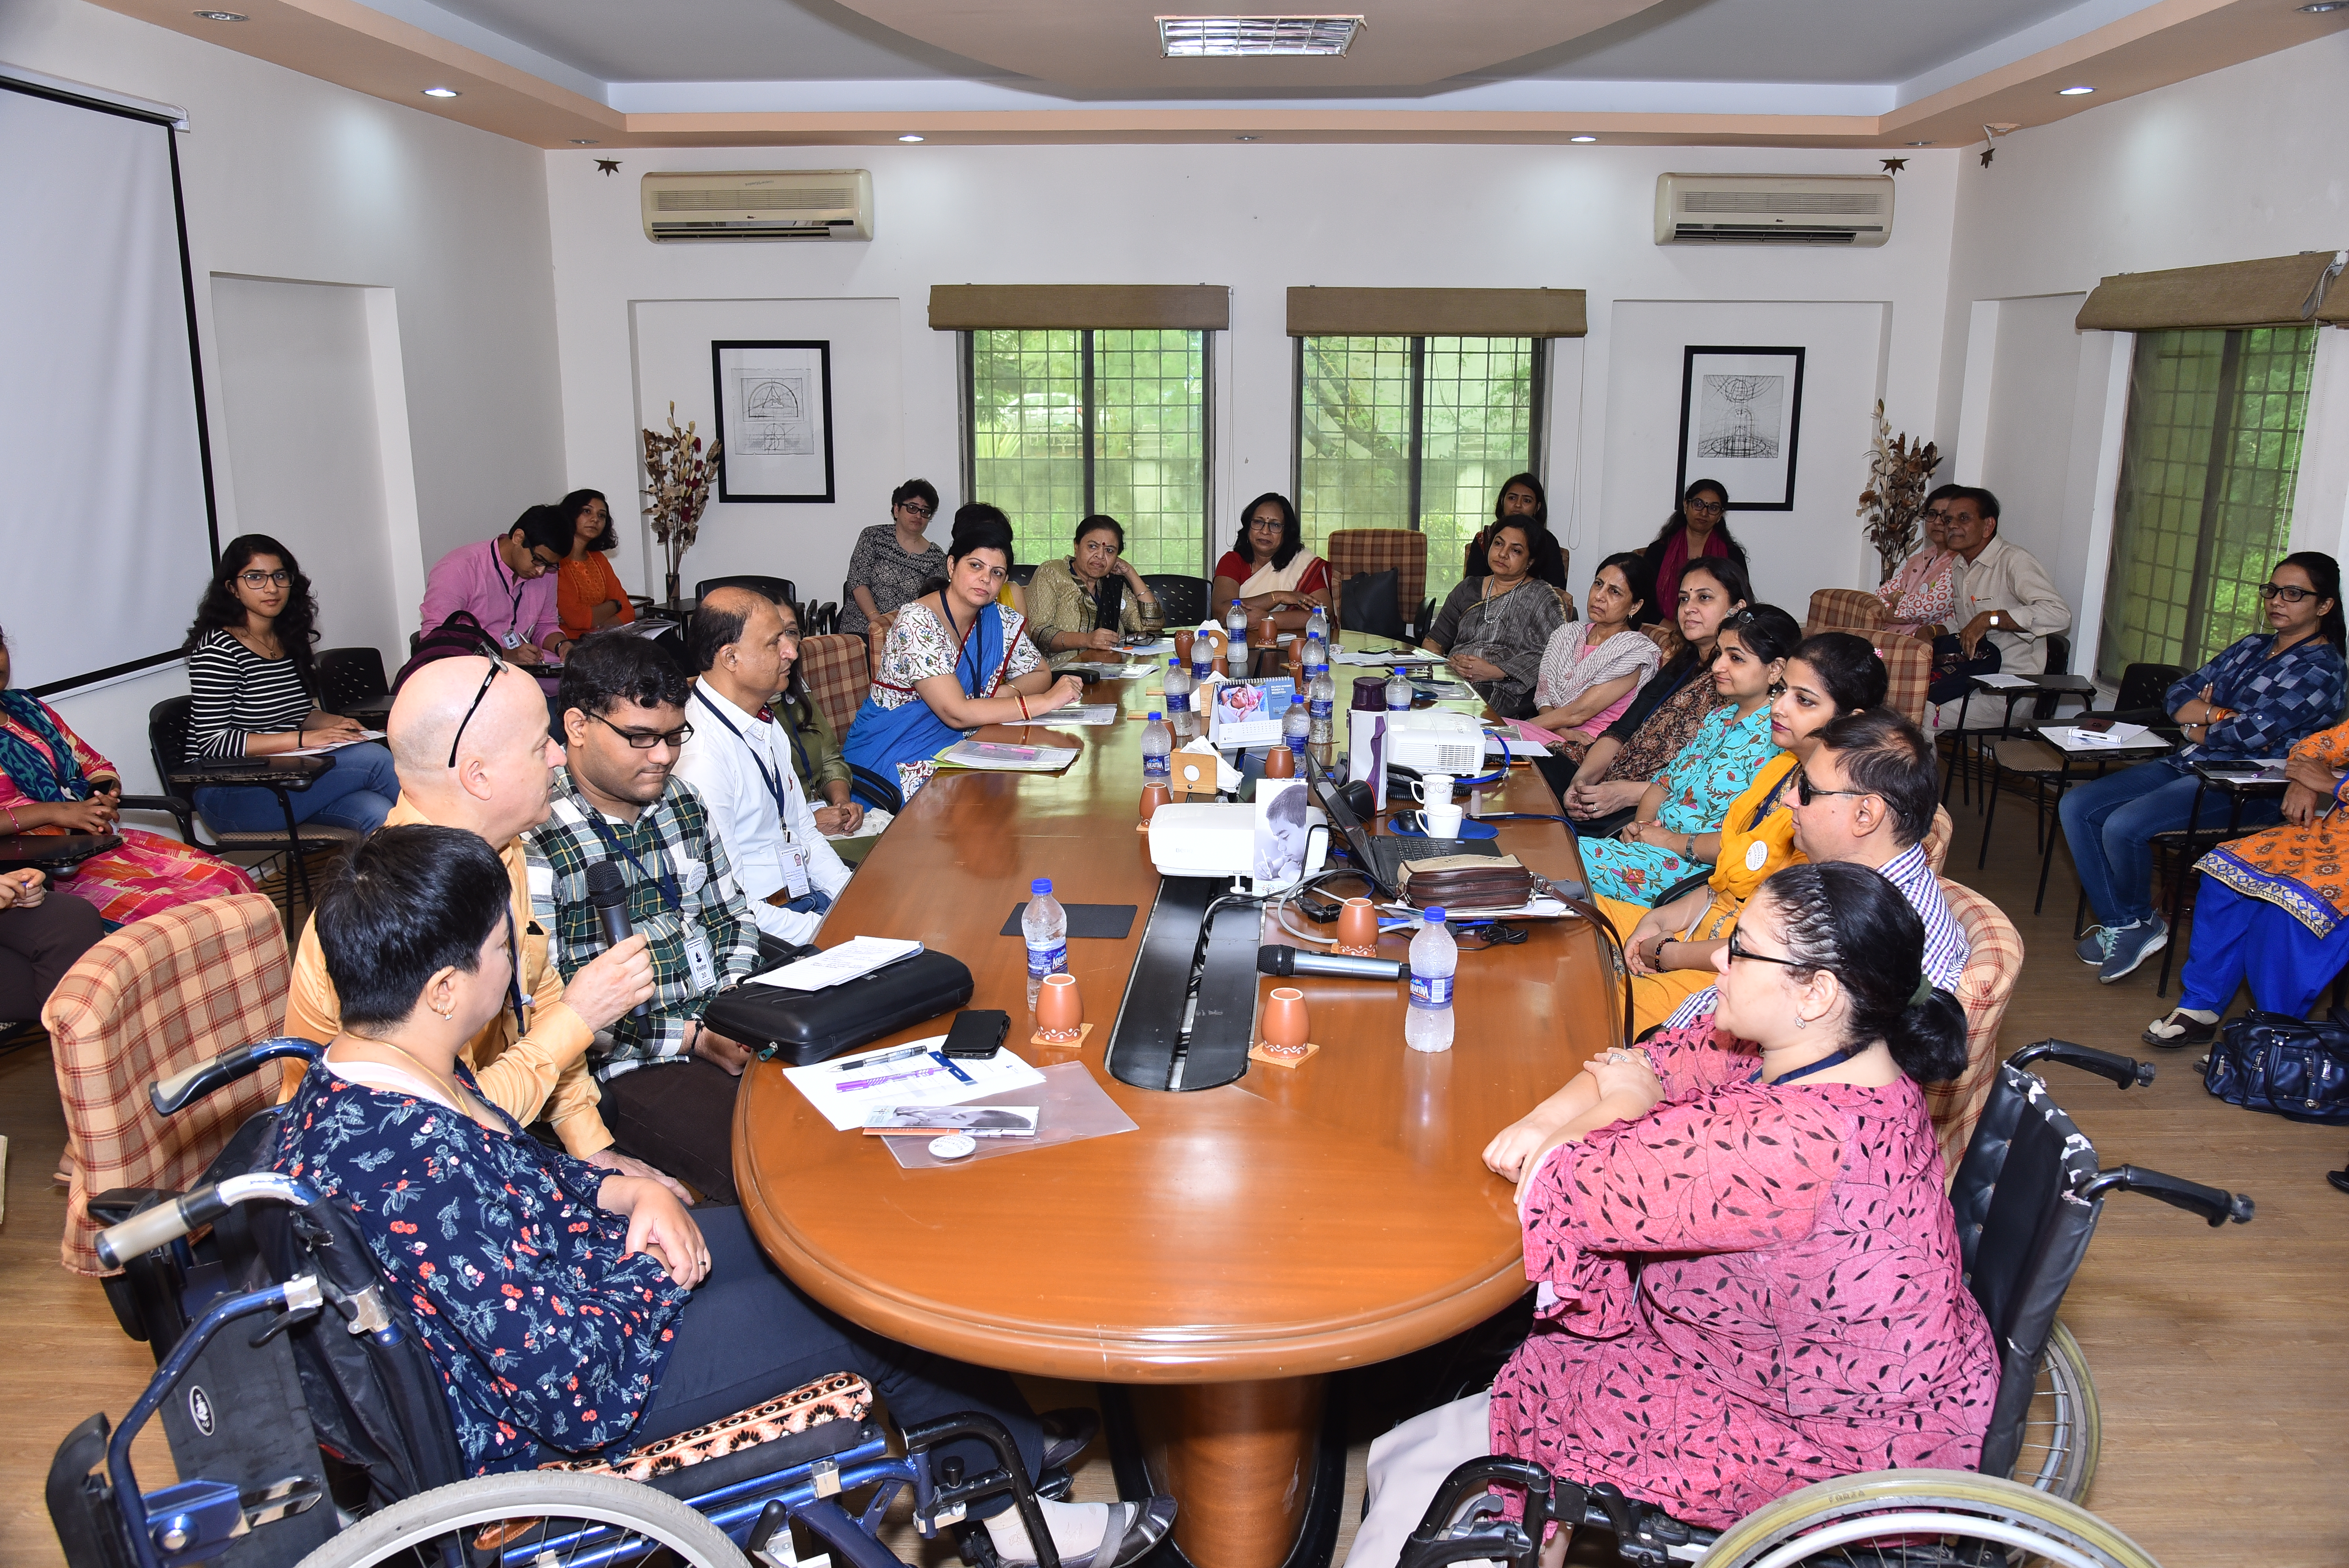 Group Discussion for perspectives of inclusive education organized by Consortium for Inclusive Education, Deepak Foundation